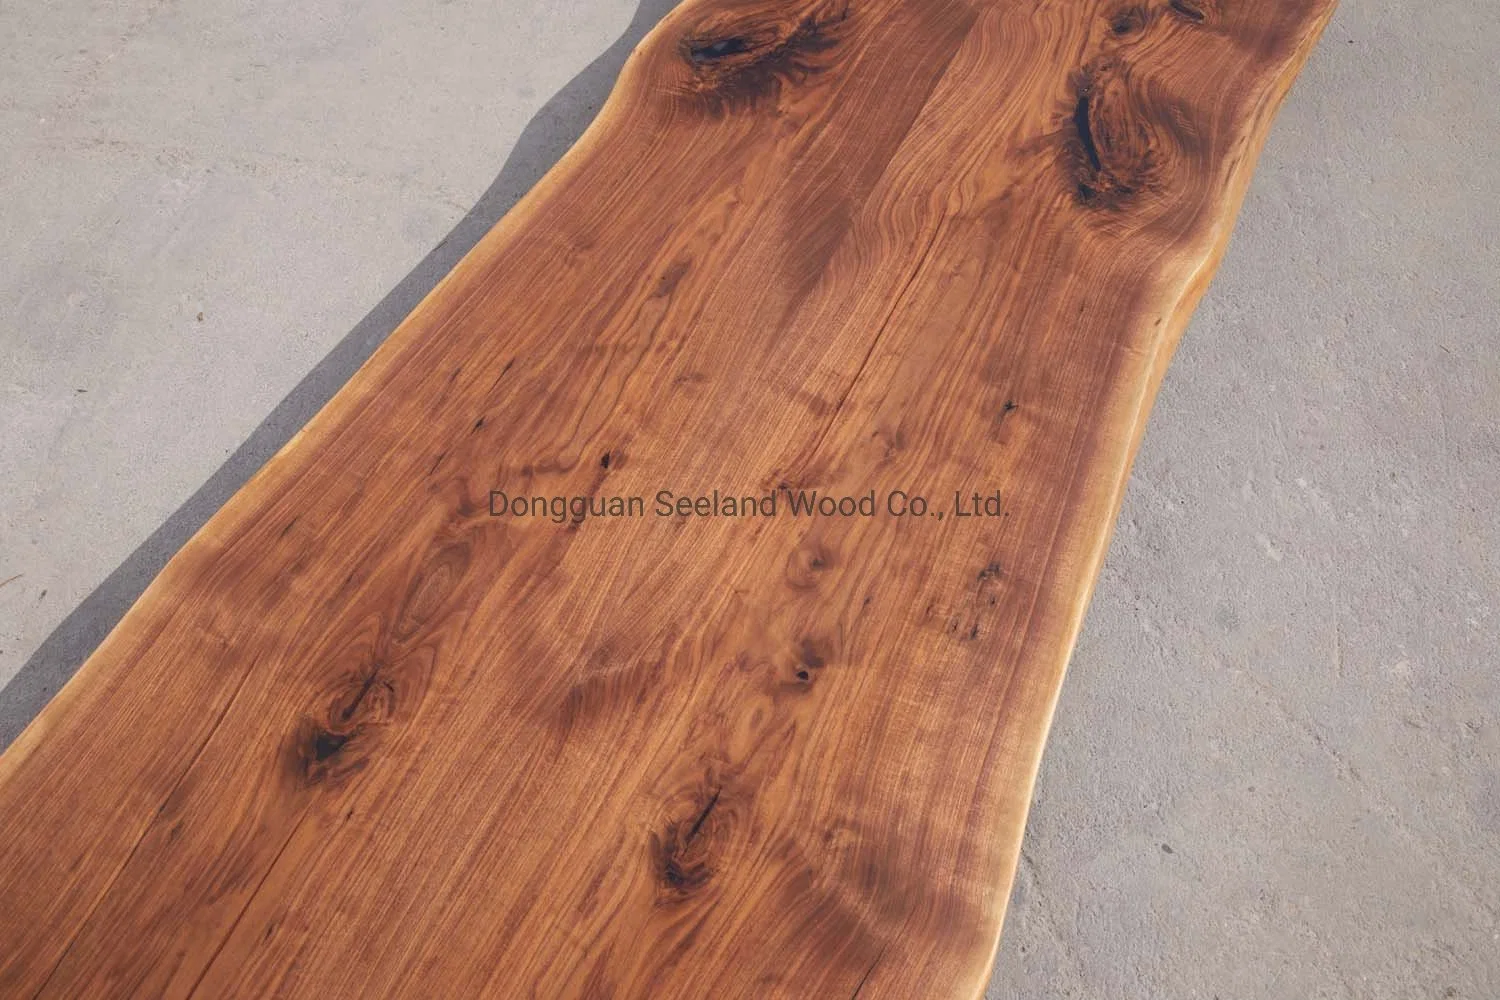 Live Edge Walnut Solid Wood Table Top /Walnut Butcher Block Top /Epoxy Resin River Table/ Natural Wood Table / Countertop/ Dining Table Set